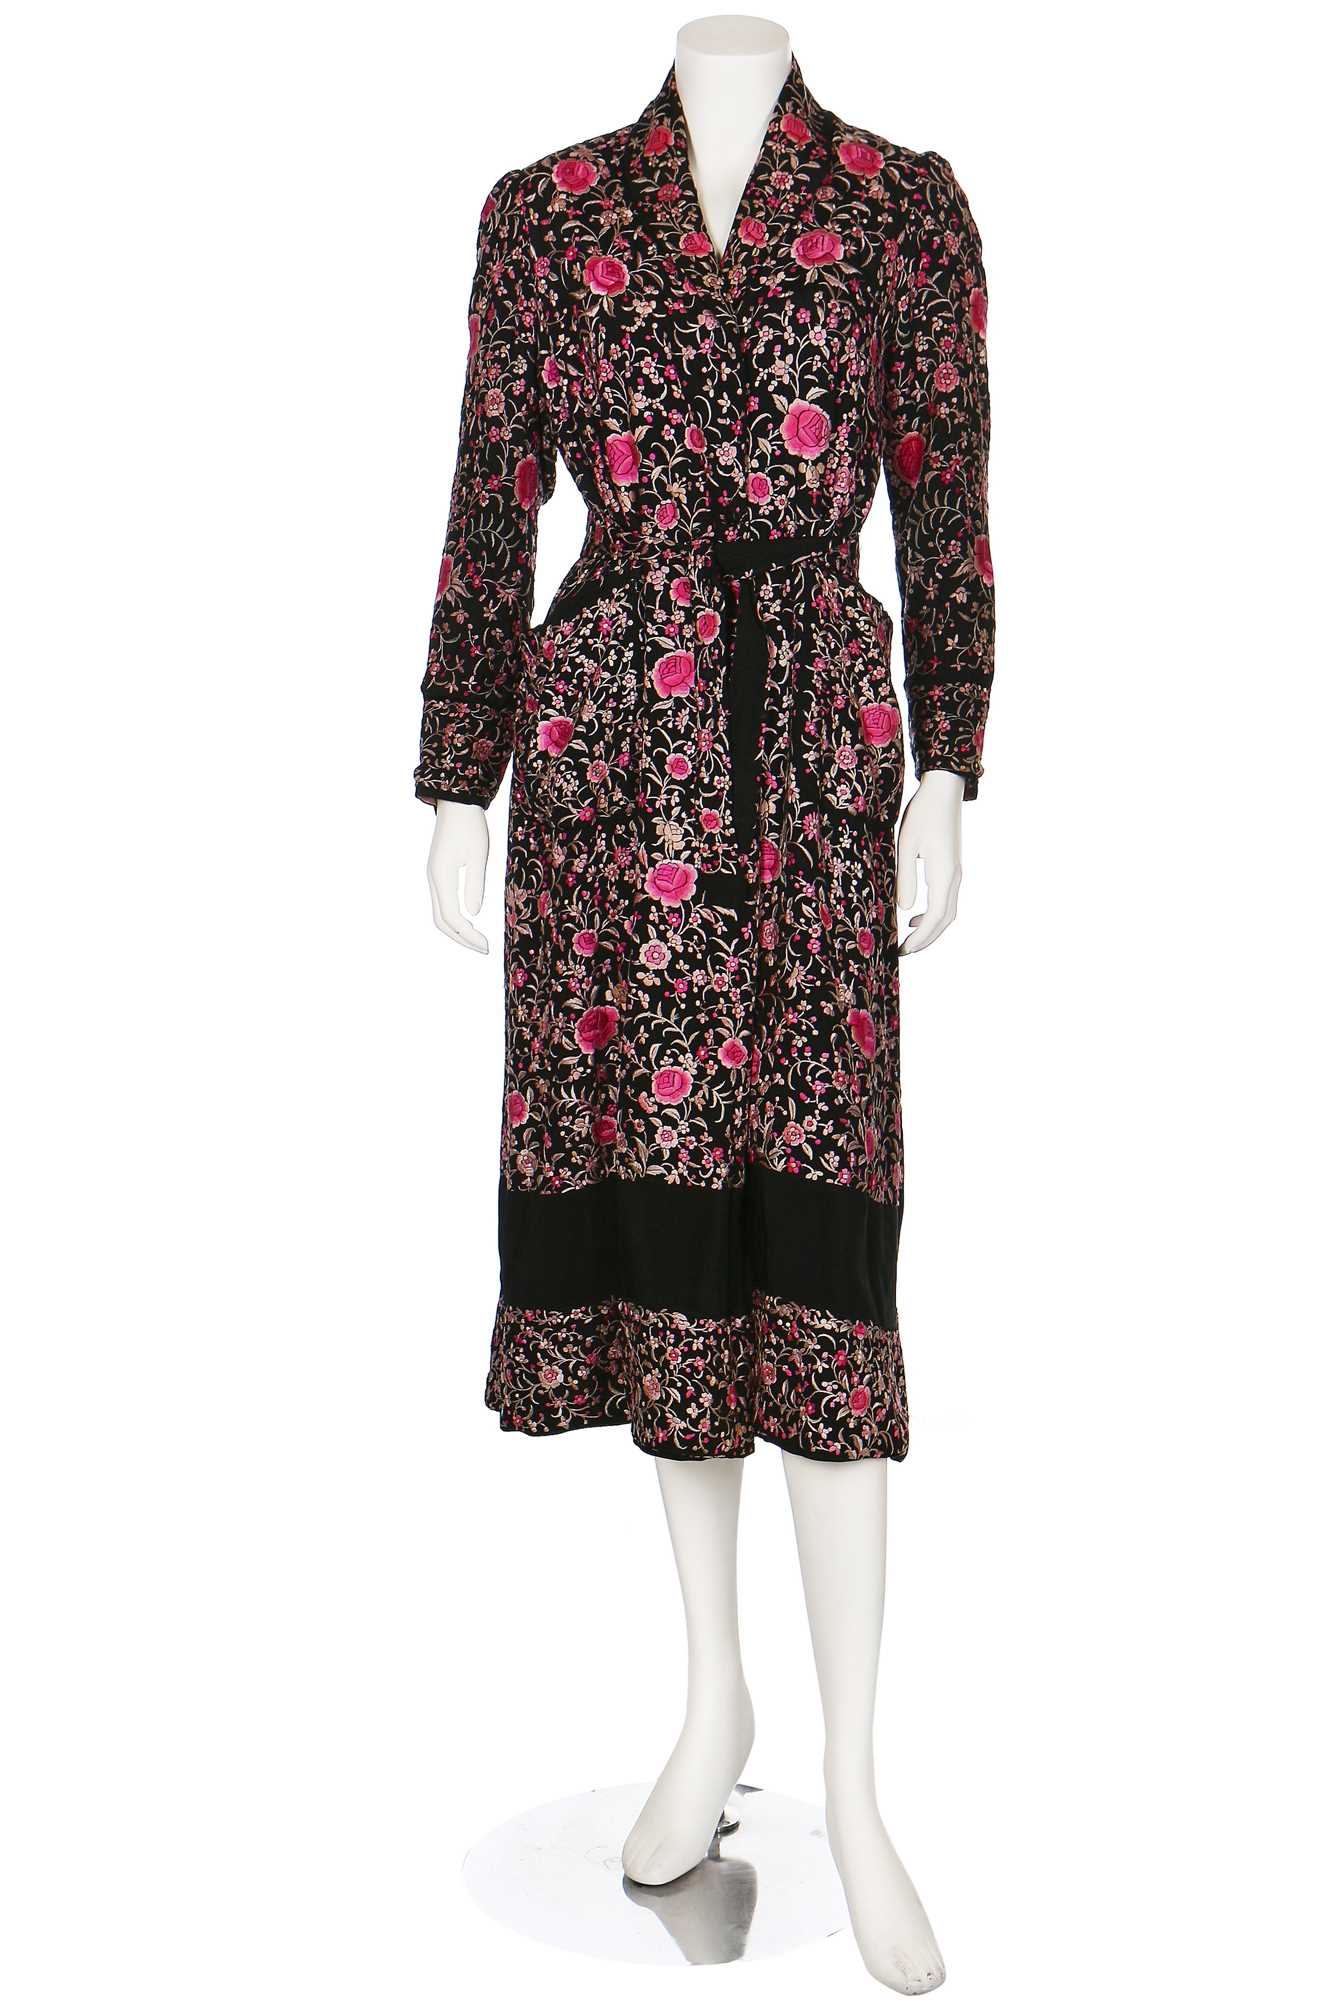 Lot 29 - A Cantonese embroidered silk evening coat/robe, 1930s